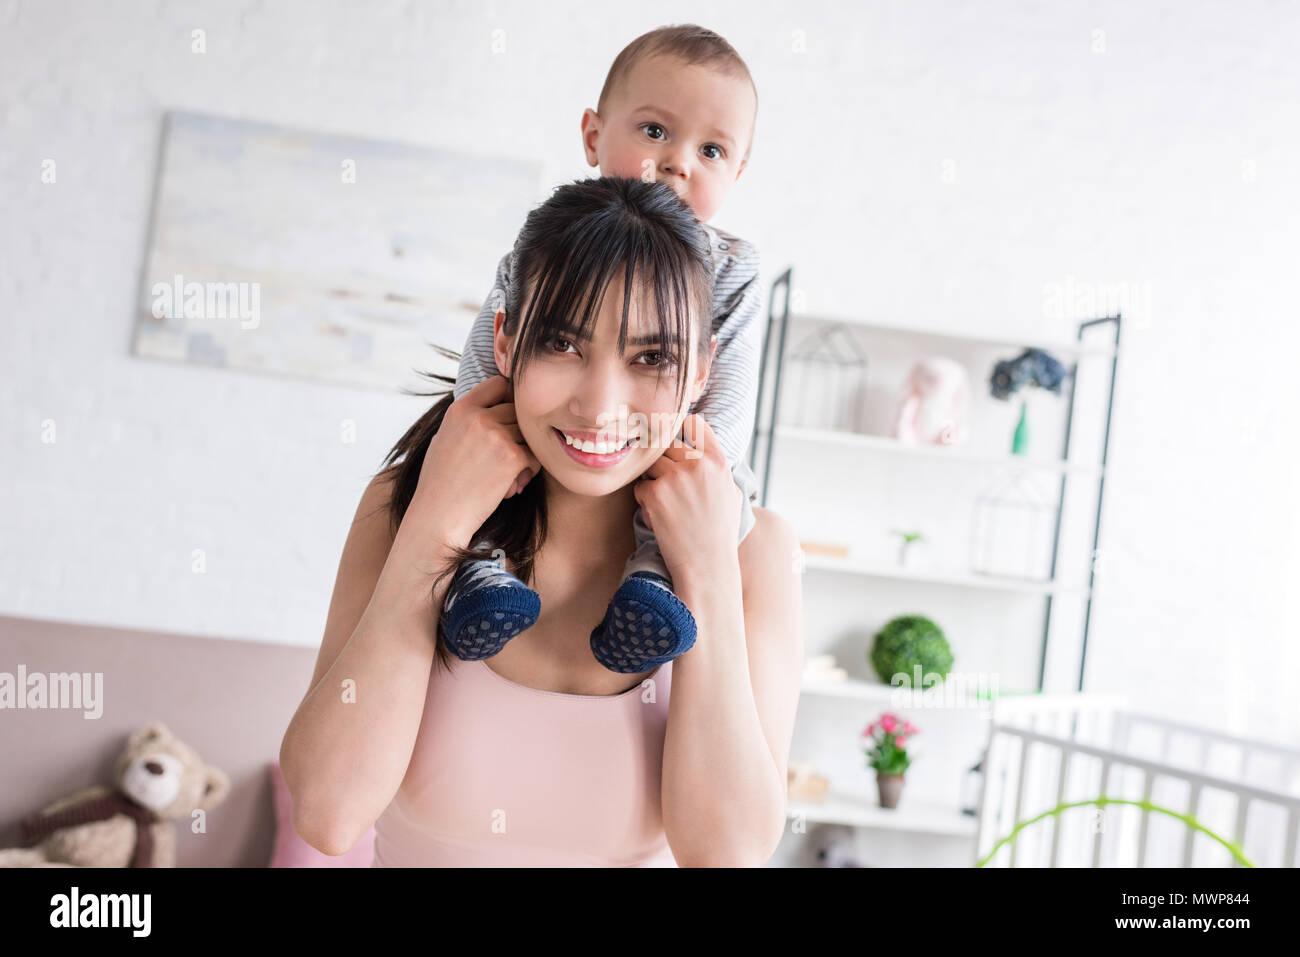 little child riding on shoulders of smiling mother at home Stock Photo